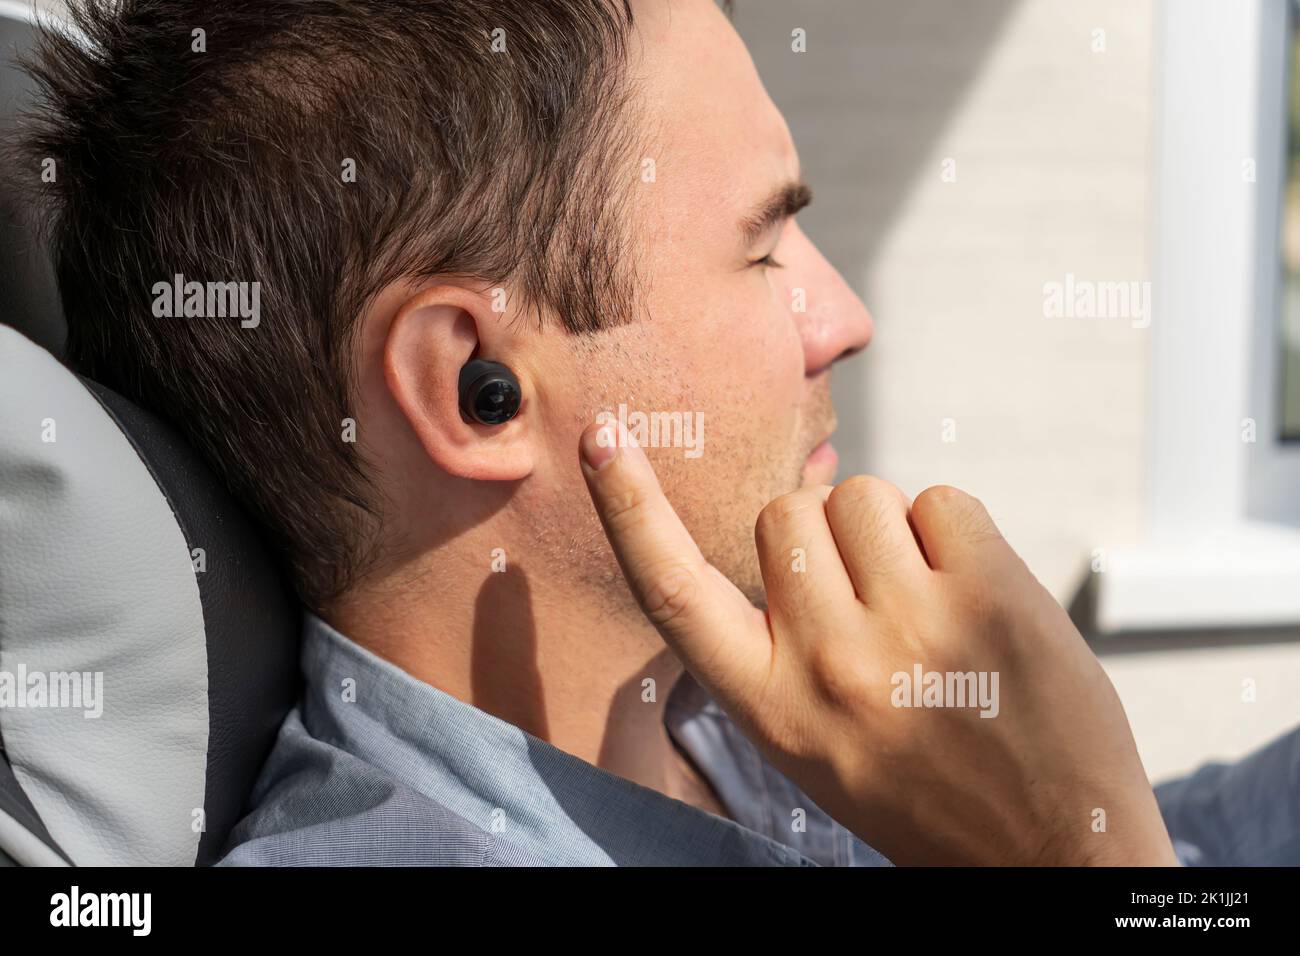 Close-up of wireless earphone in human ear on dark background. insert the earphone into the ear. listening to music with headphones. Stock Photo